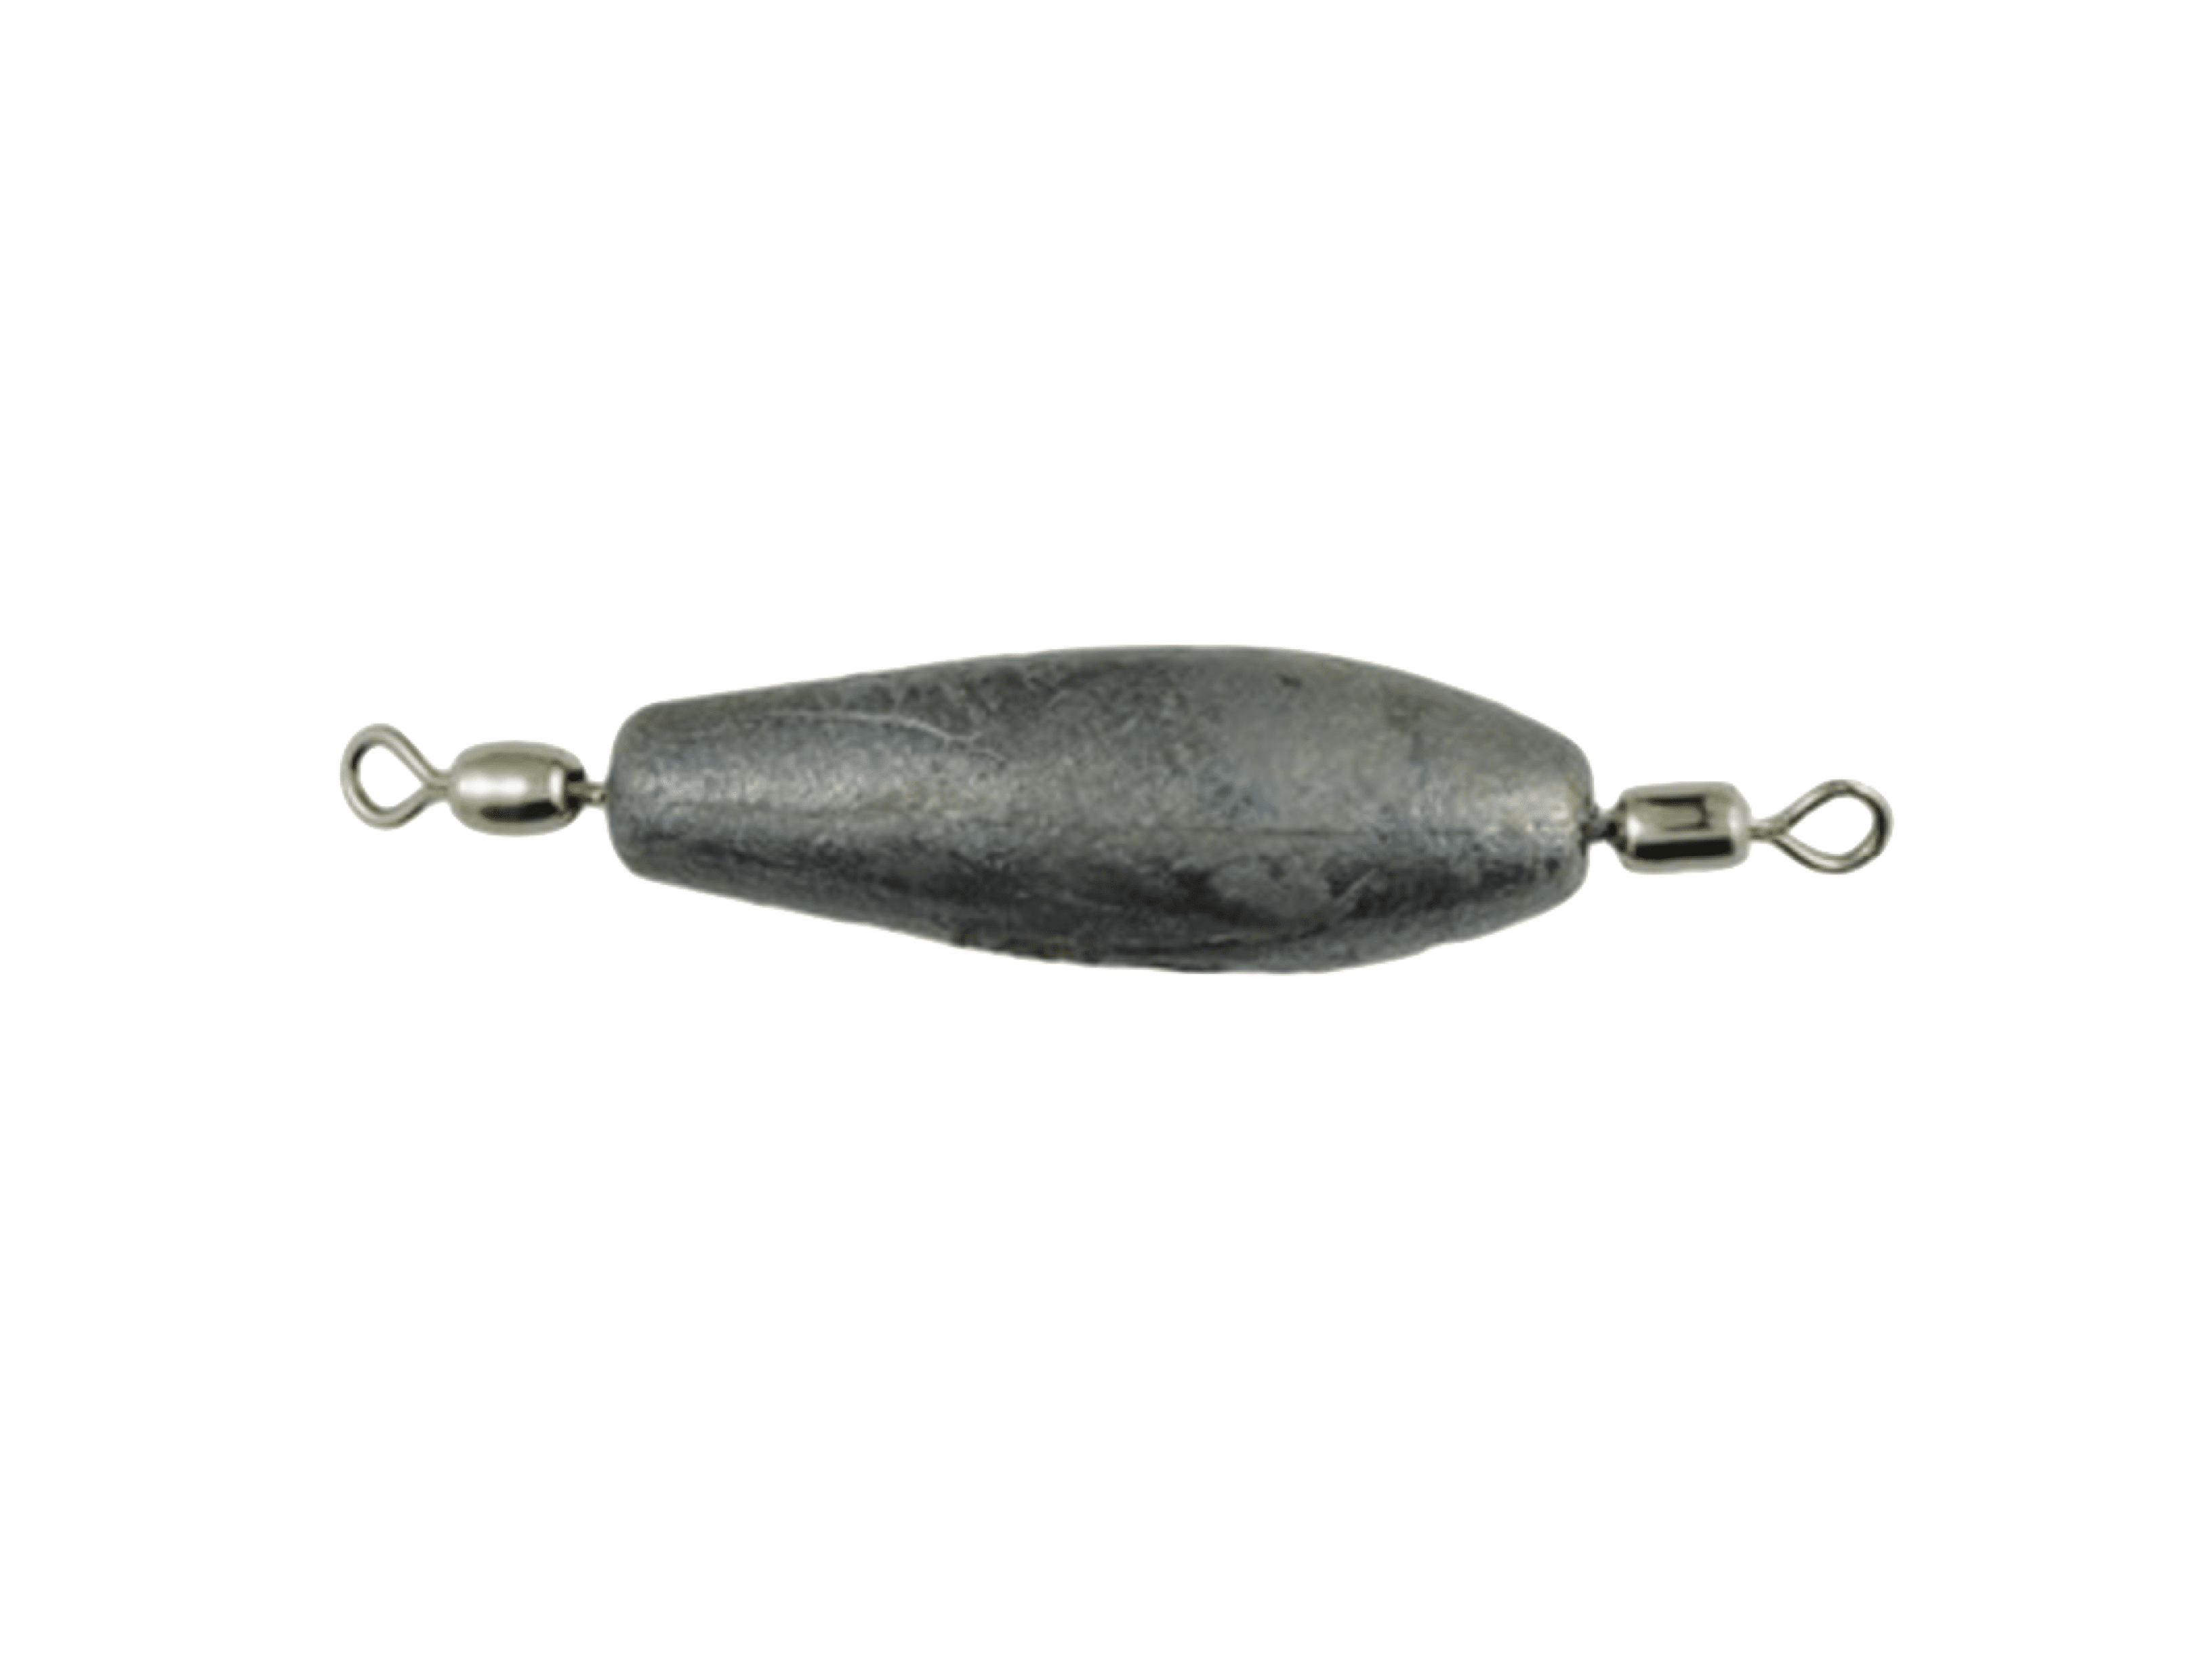 Pin Lead Sinker for Fishing, Freshwater and Saltwater Fishing Weight (1 oz,  2 oz, 5 oz)